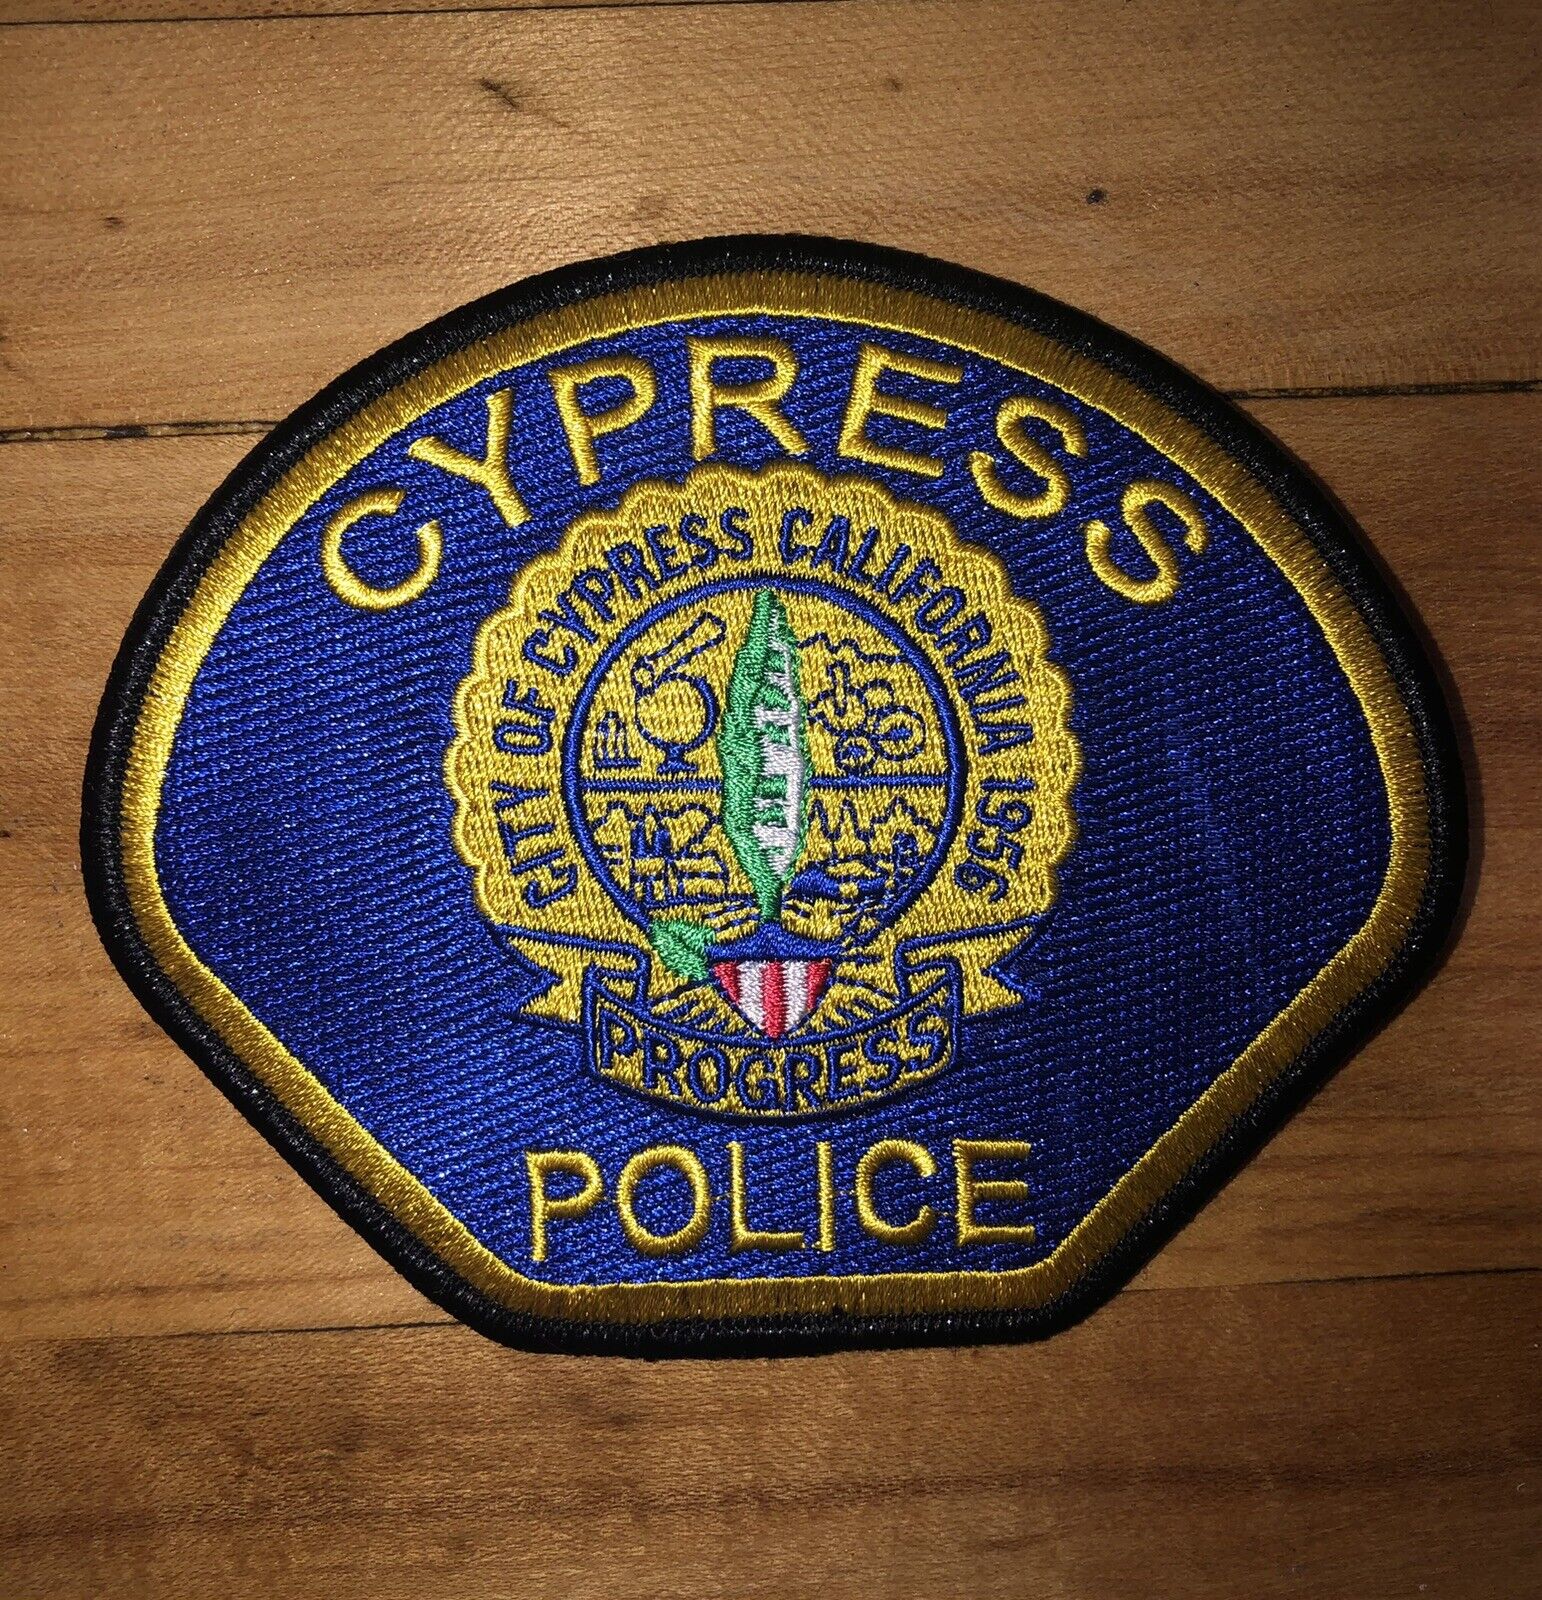 Cypress California Police Department Patch